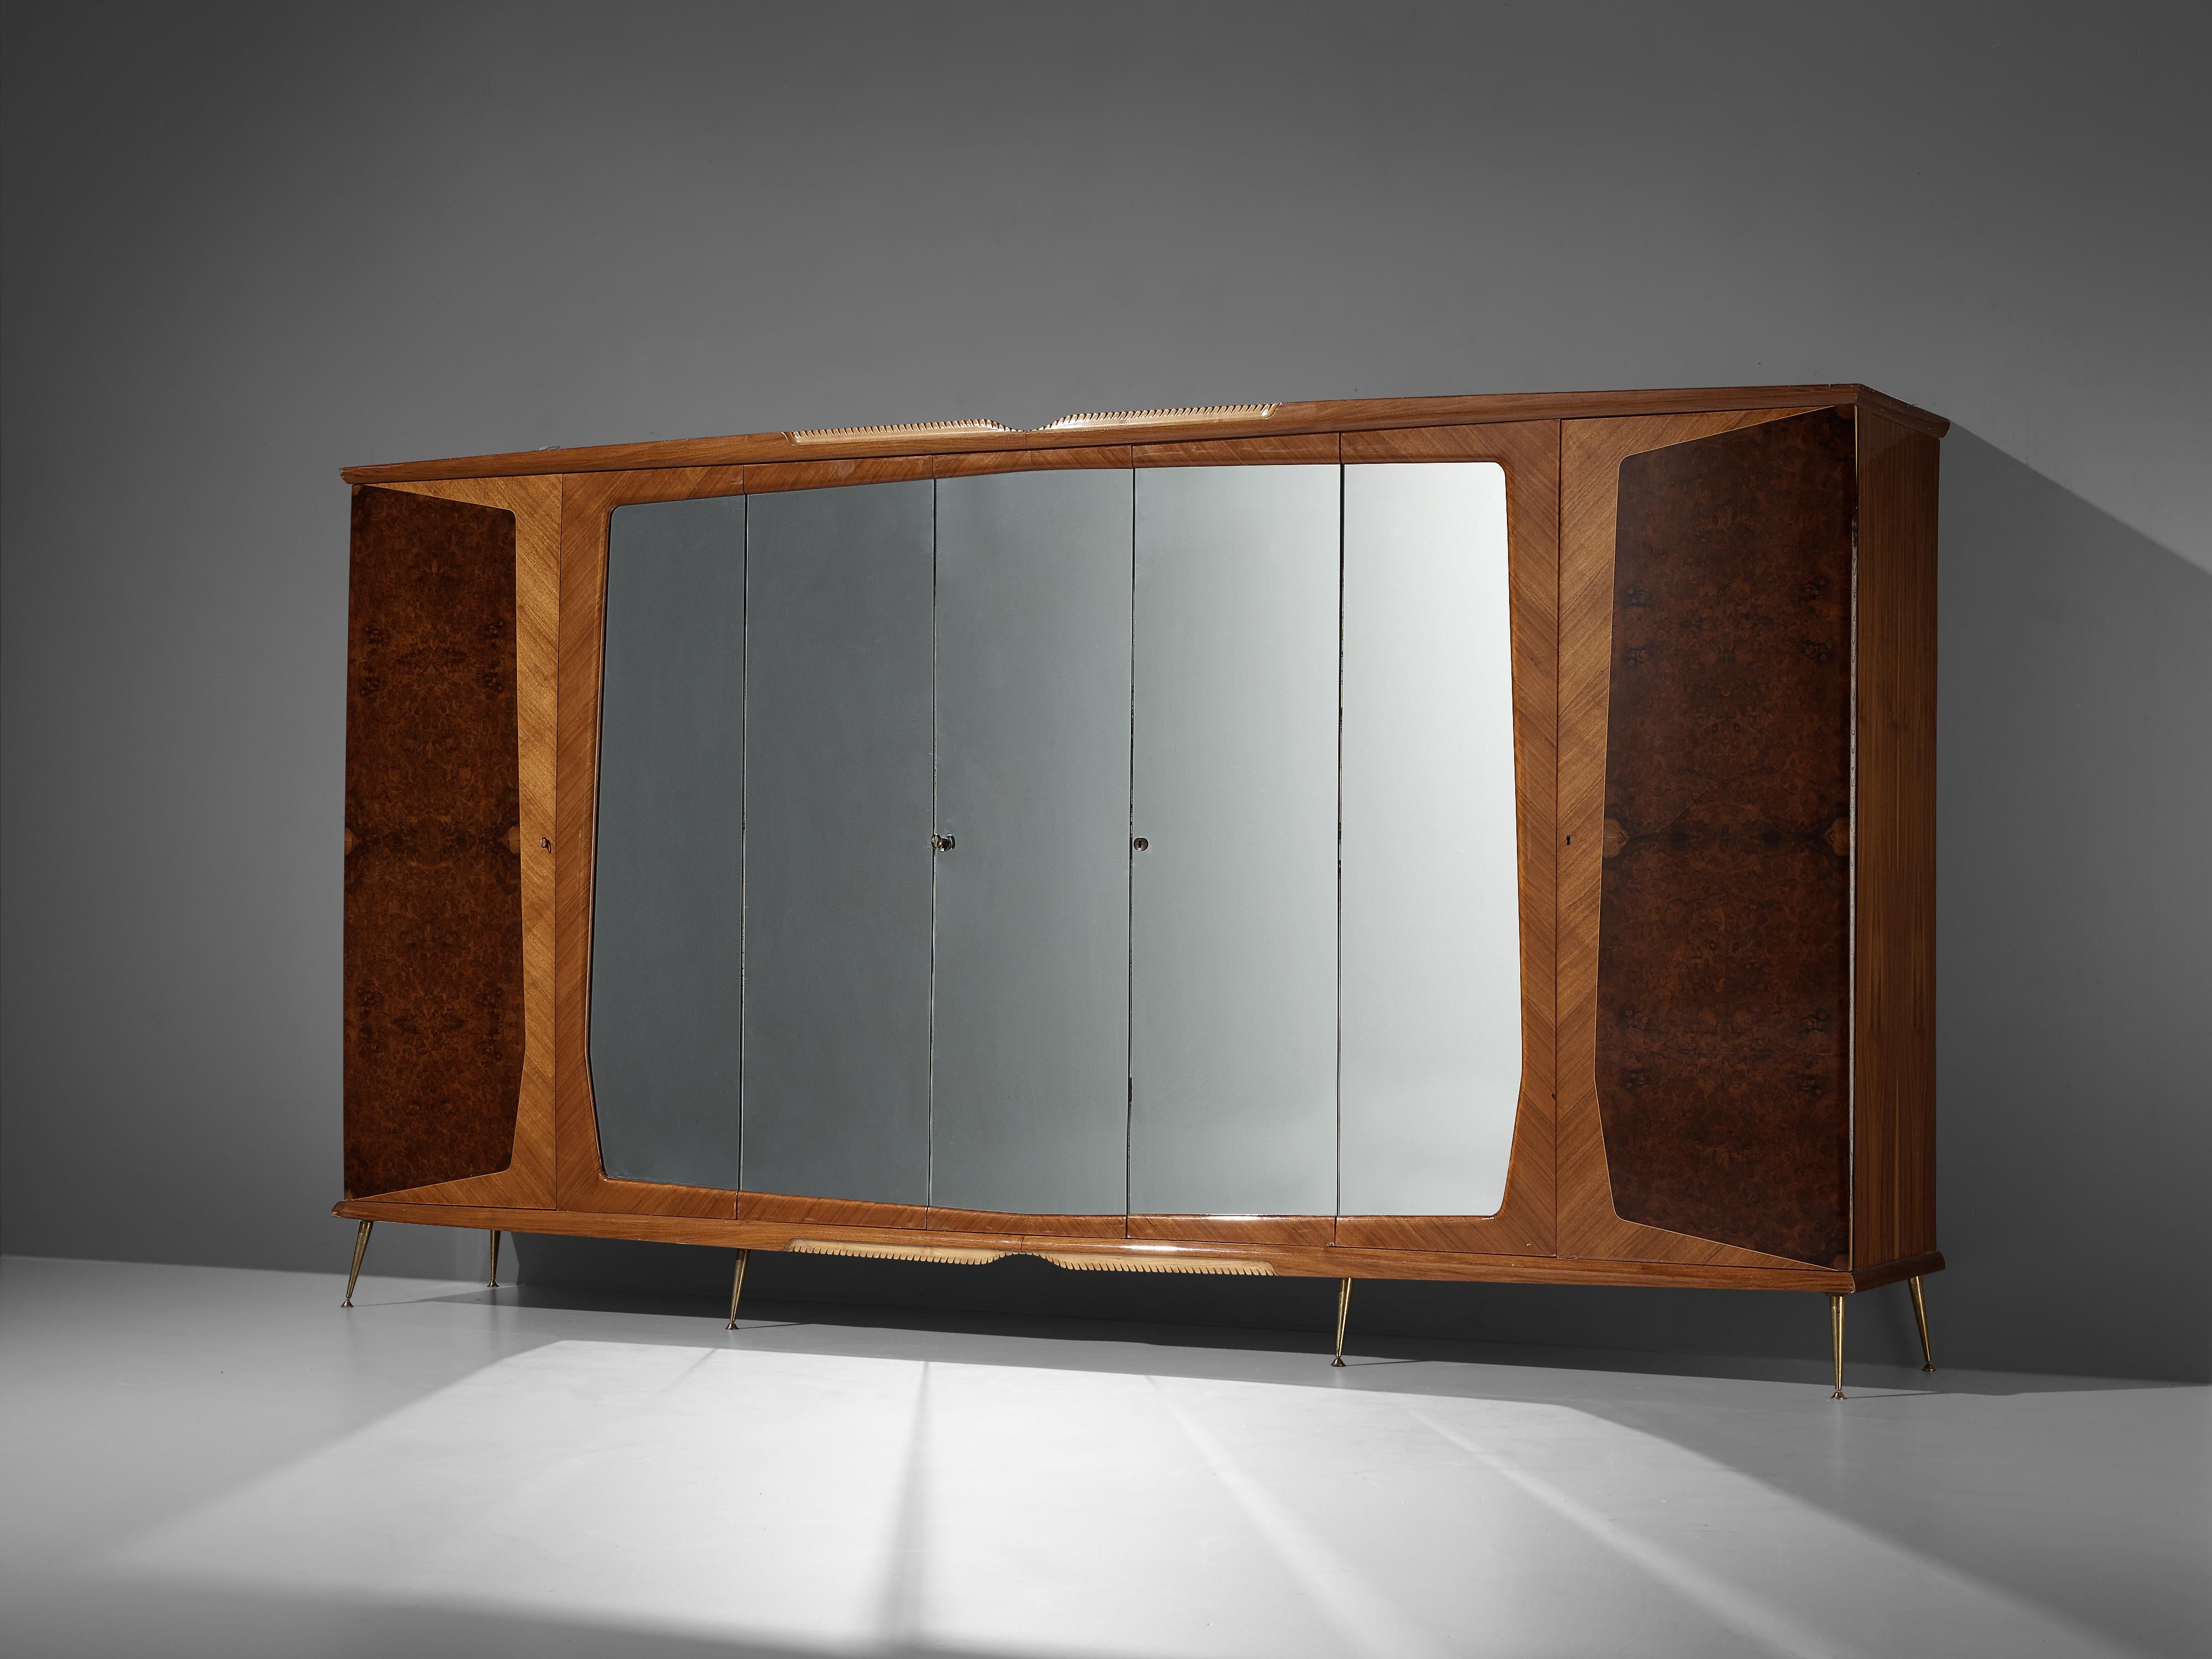 Large Italian wardrobe, mahogany, walnut burl, glass, brass, Italy, 1950s

With its seven doors this wardrobe has an impressive size. Five doors hold a mirrored surface, the two outer doors show luxurious walnut burl in combination with mahogany